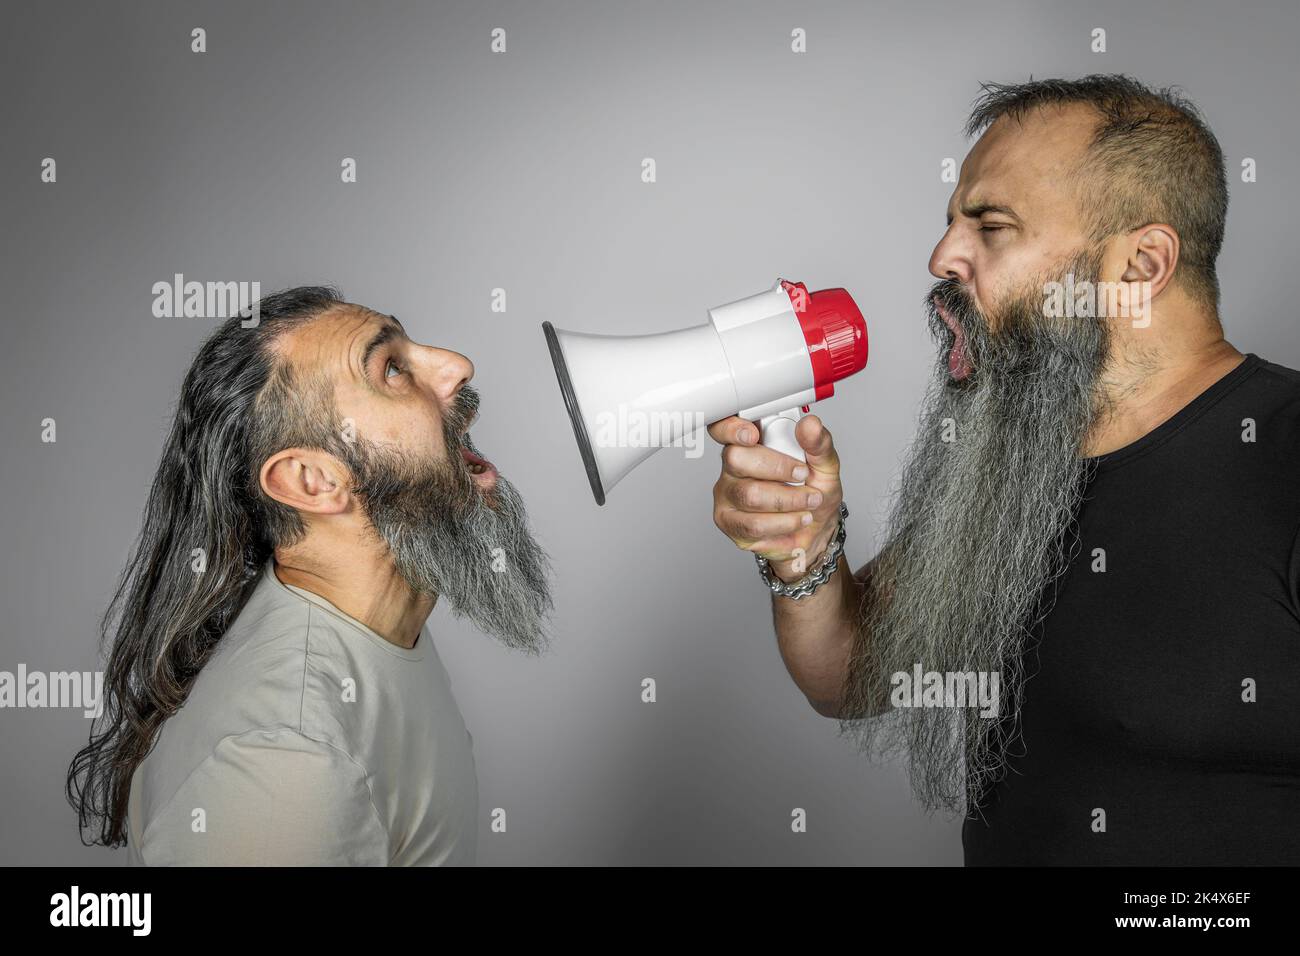 man yells with megaphone to another man with long hair Stock Photo